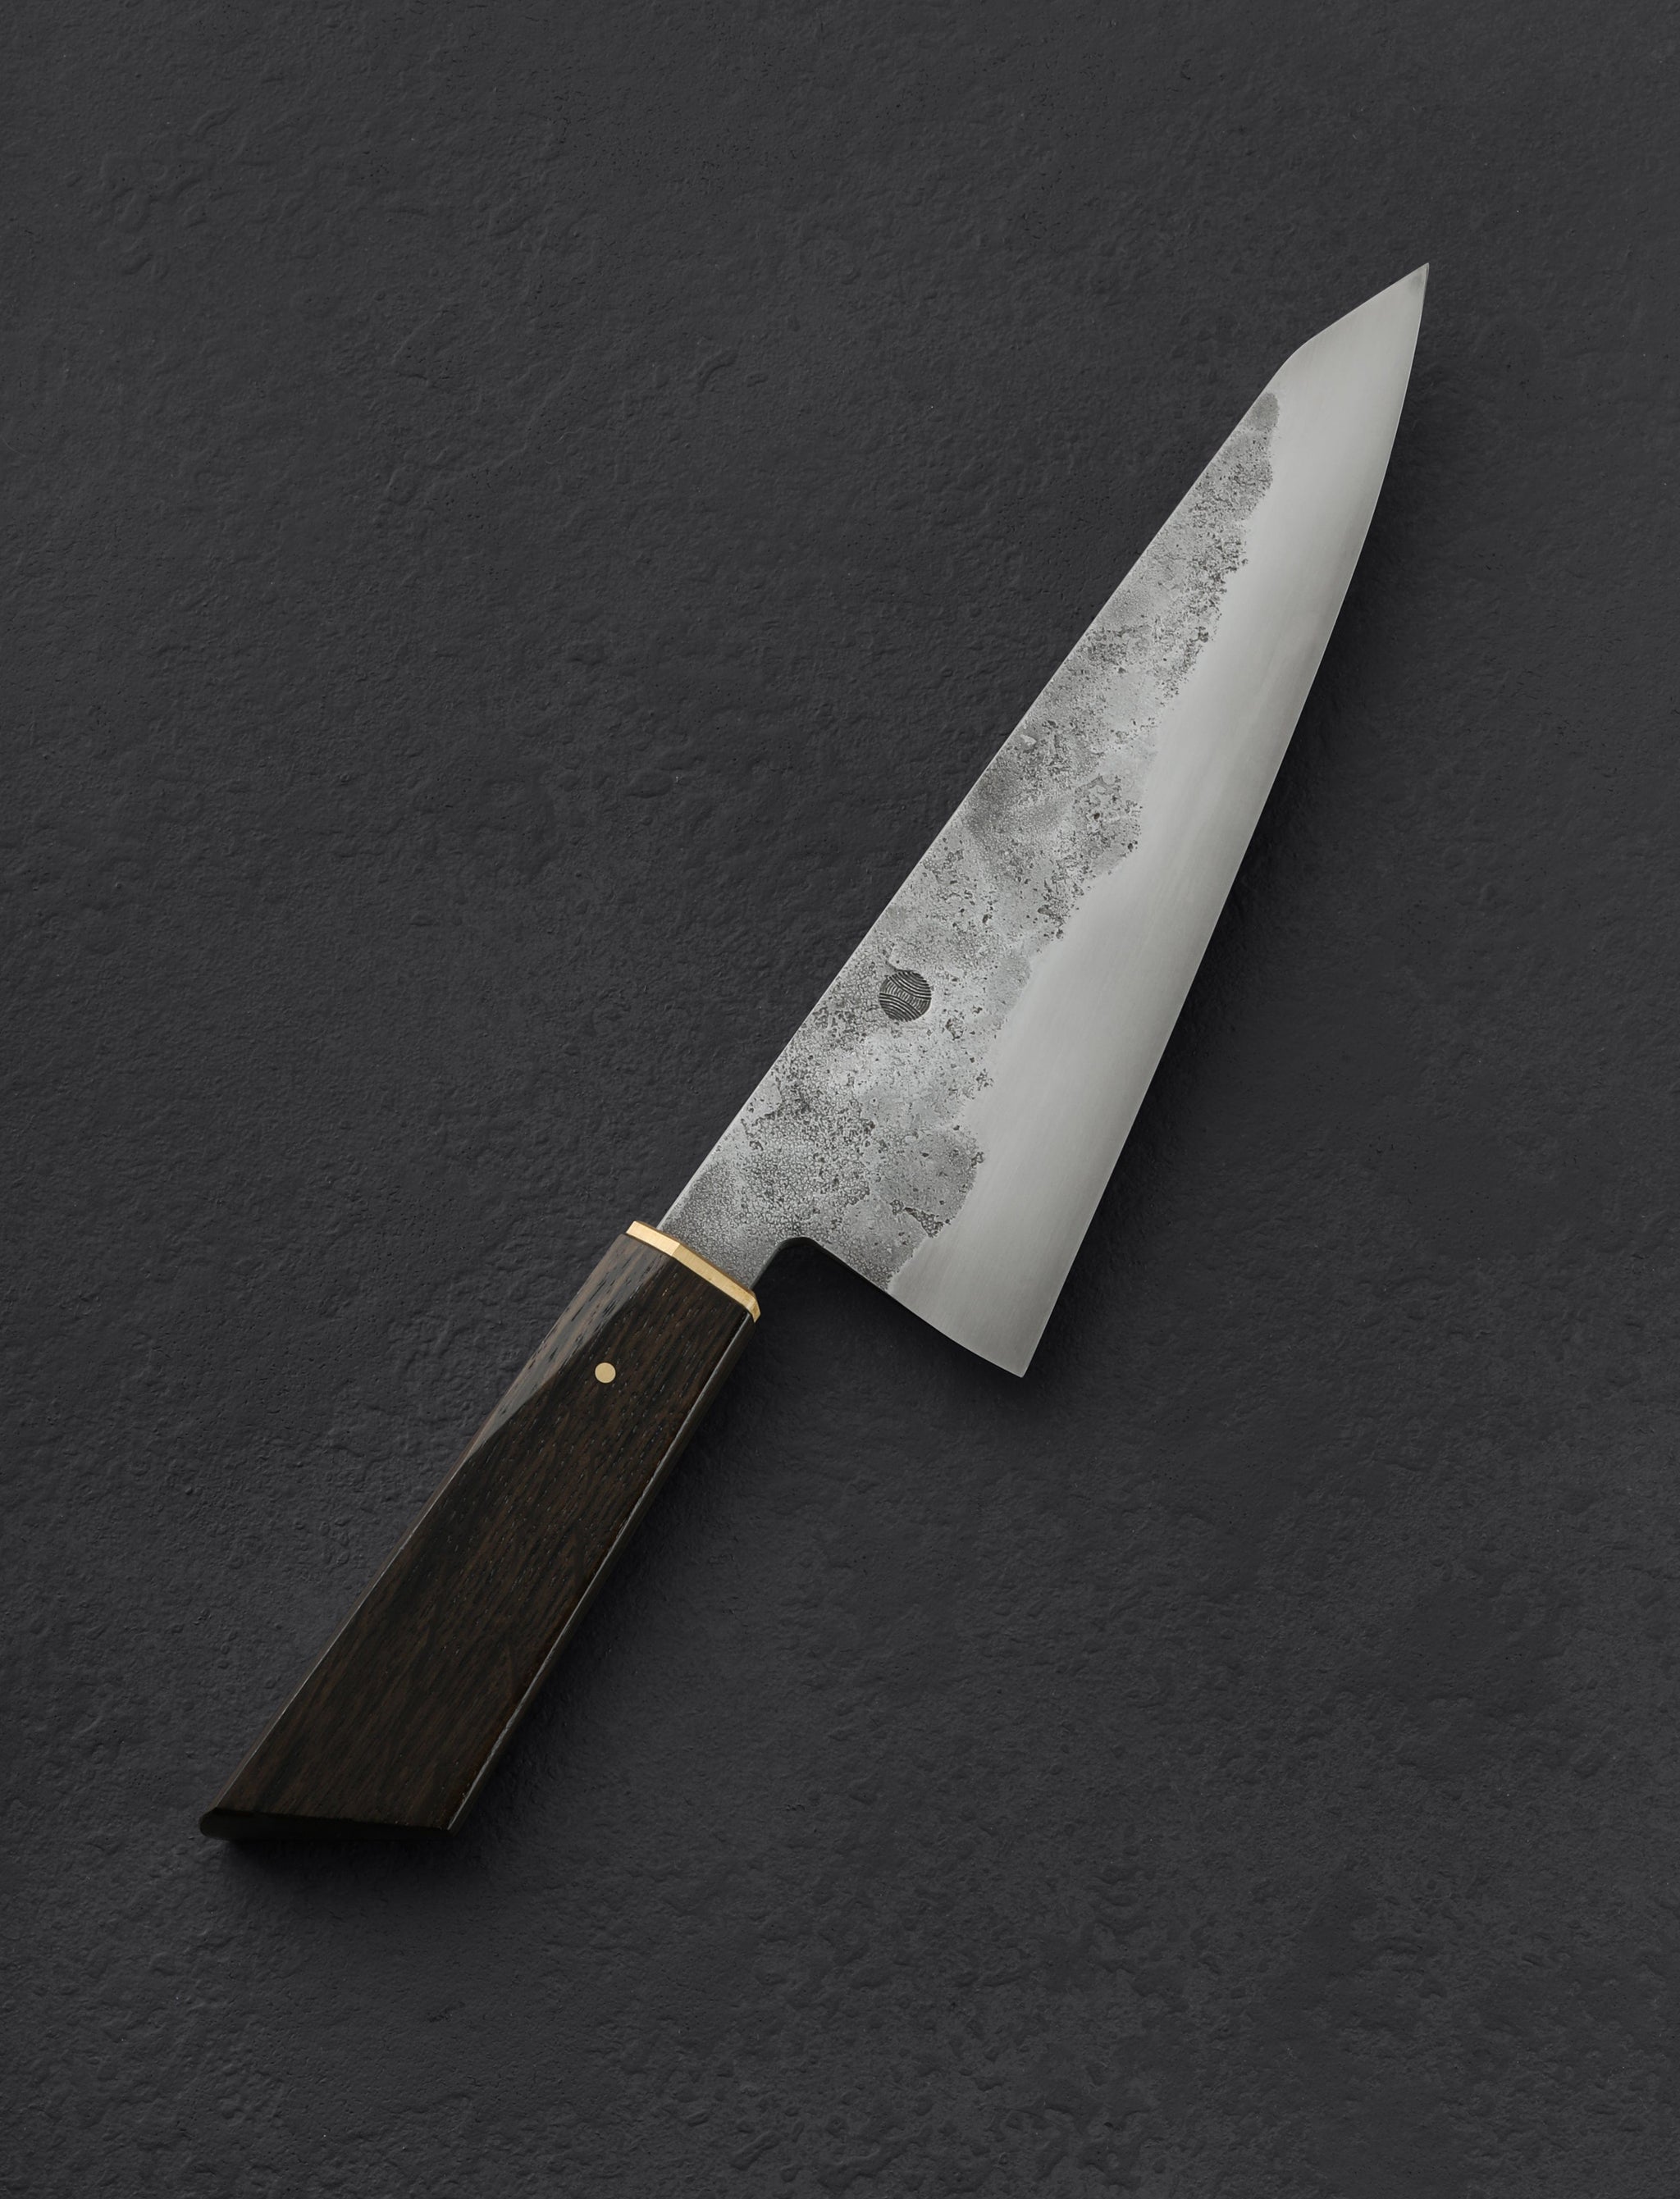 Gyuto LS185  An LS626 Chef Knife Collaboration